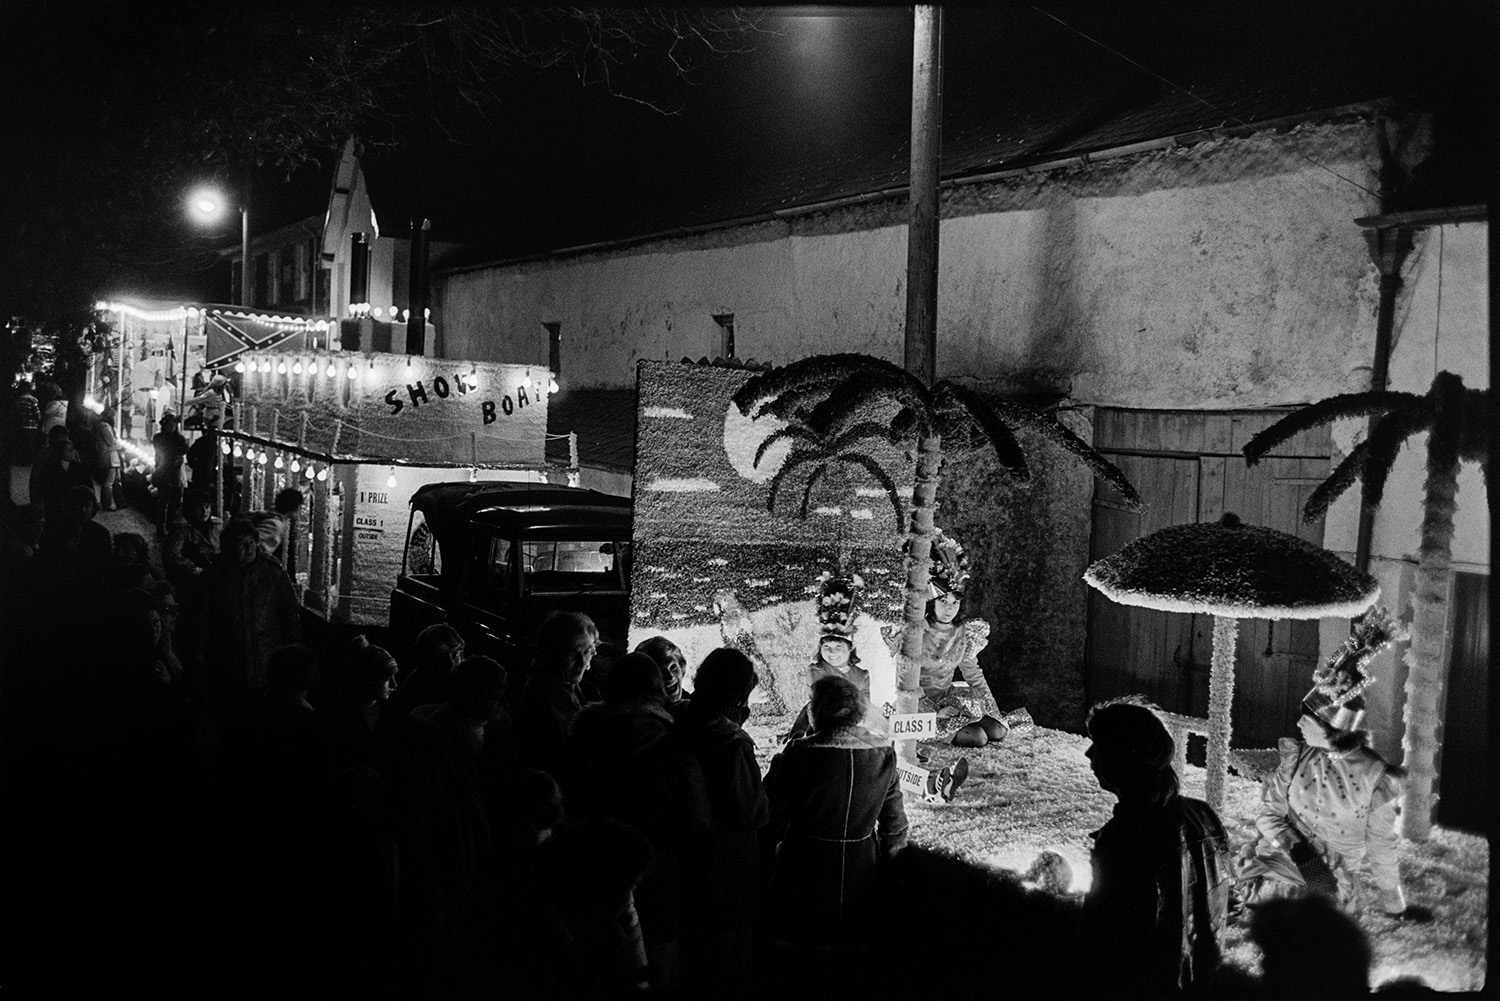 Carnival floats at night people in fancy dress, flares, Bride and Groom. 
[Carnival floats parading through the streets of Dolton at night in Dolton Carnival. People are lining the street watching the parade. The float in the foreground has palm trees and the one behind is titled 'Show Boats'.]